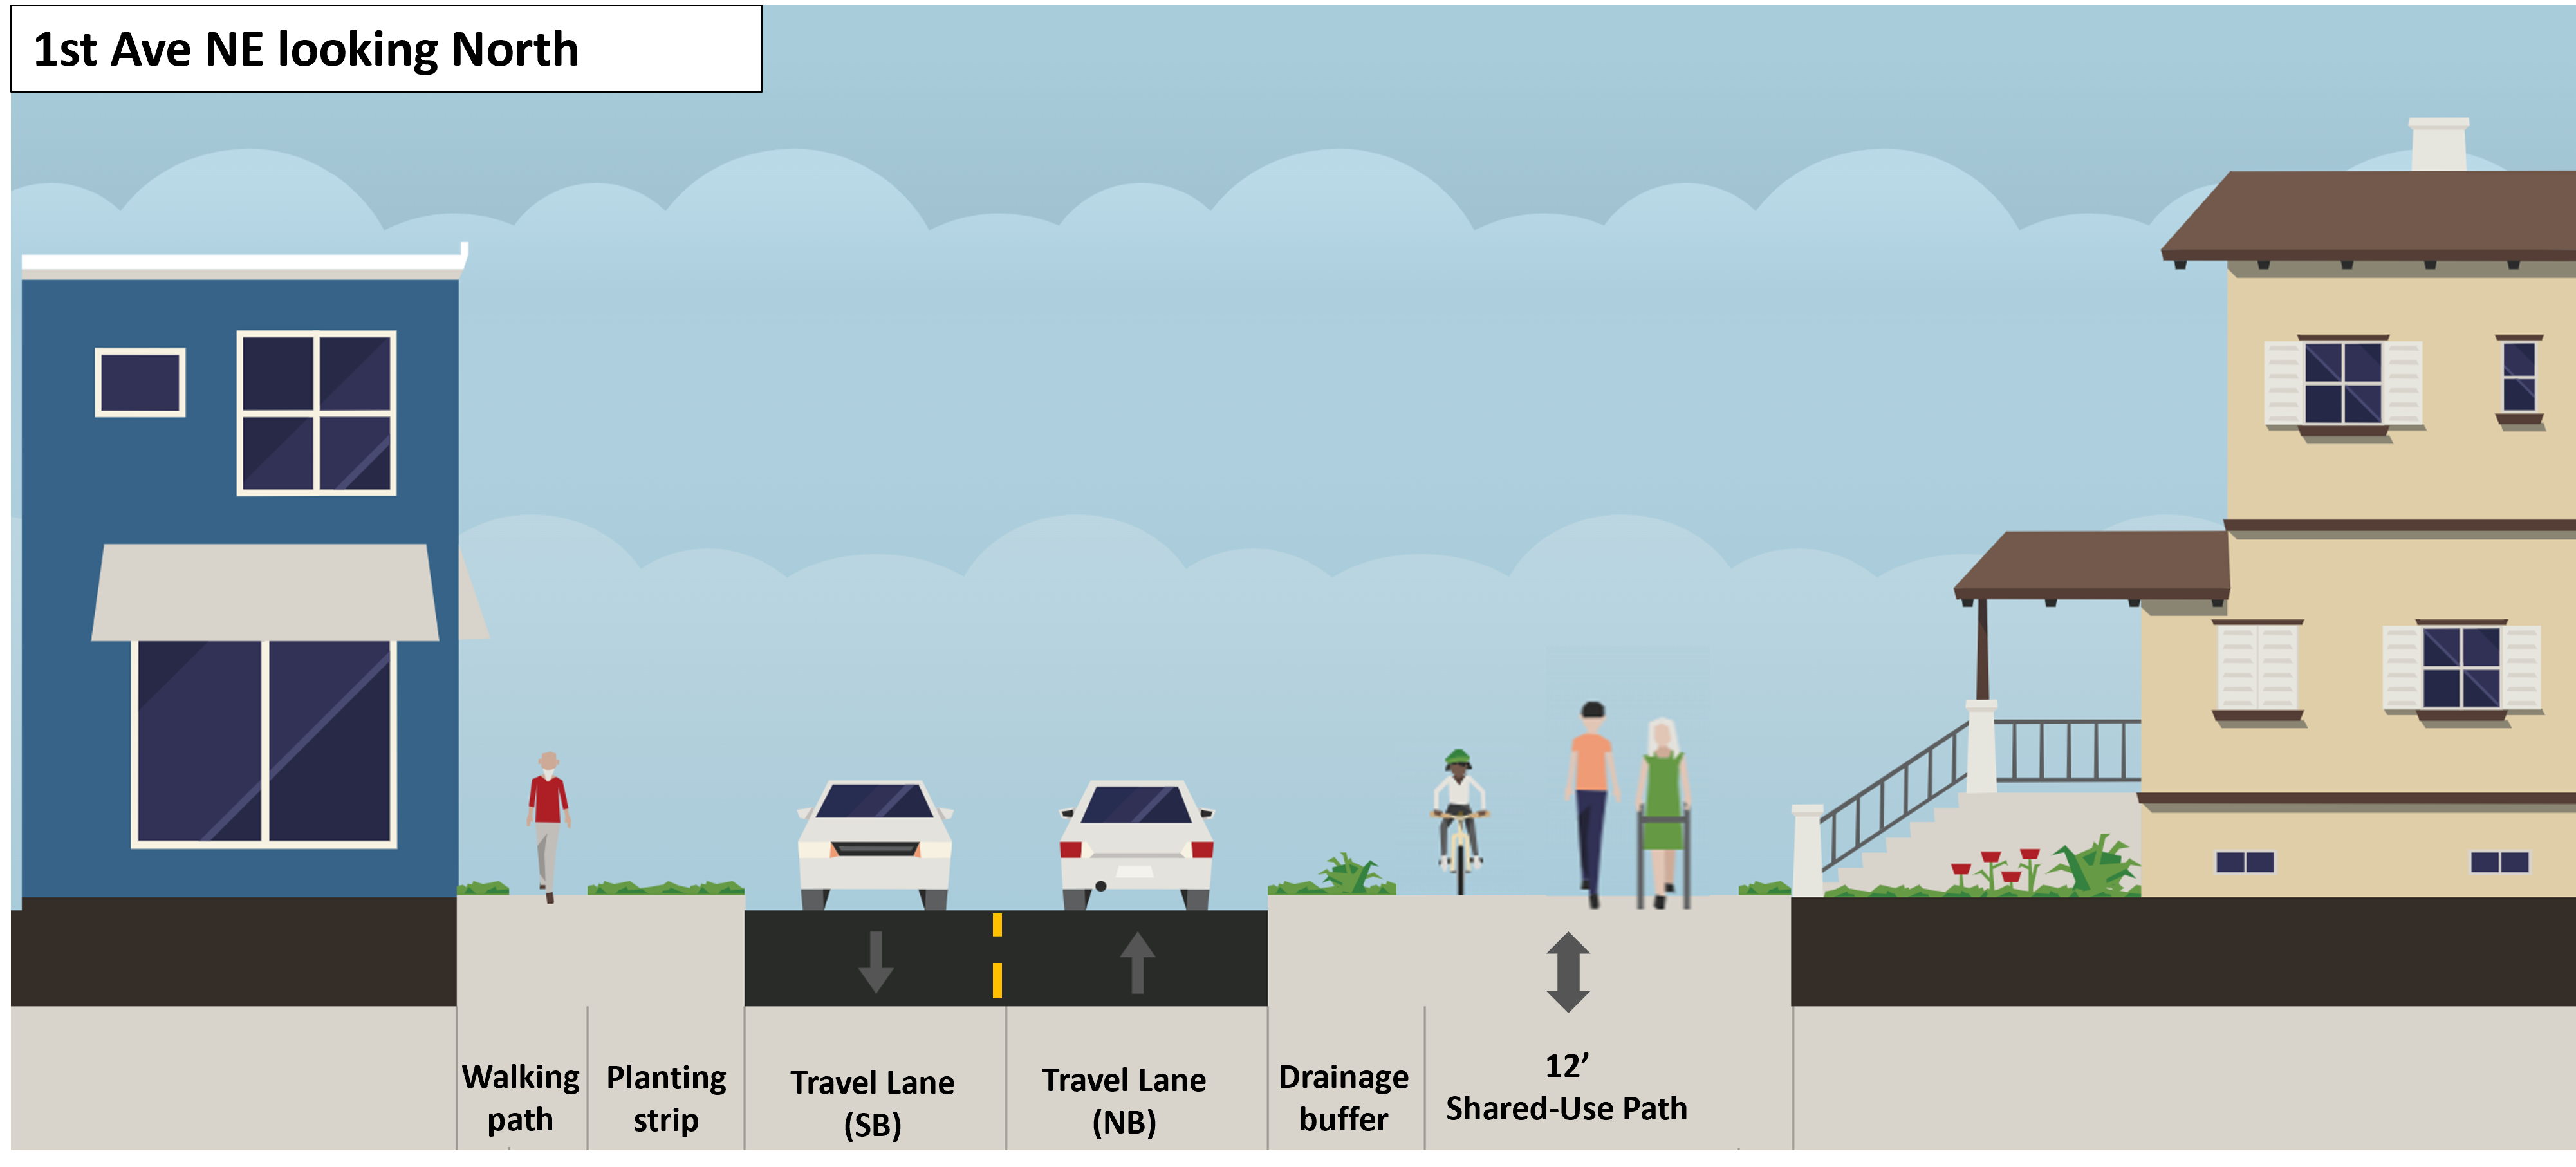 This image shows the proposed street design of 1st Ave NE between NE 117th St and NE 130th St looking northbound. Viewing from west to east (left to right), it shows a walking path, a drainage buffer, a southbound travel lane, a northbound travel lane, a planting strip, and 12-foot shared-use path.